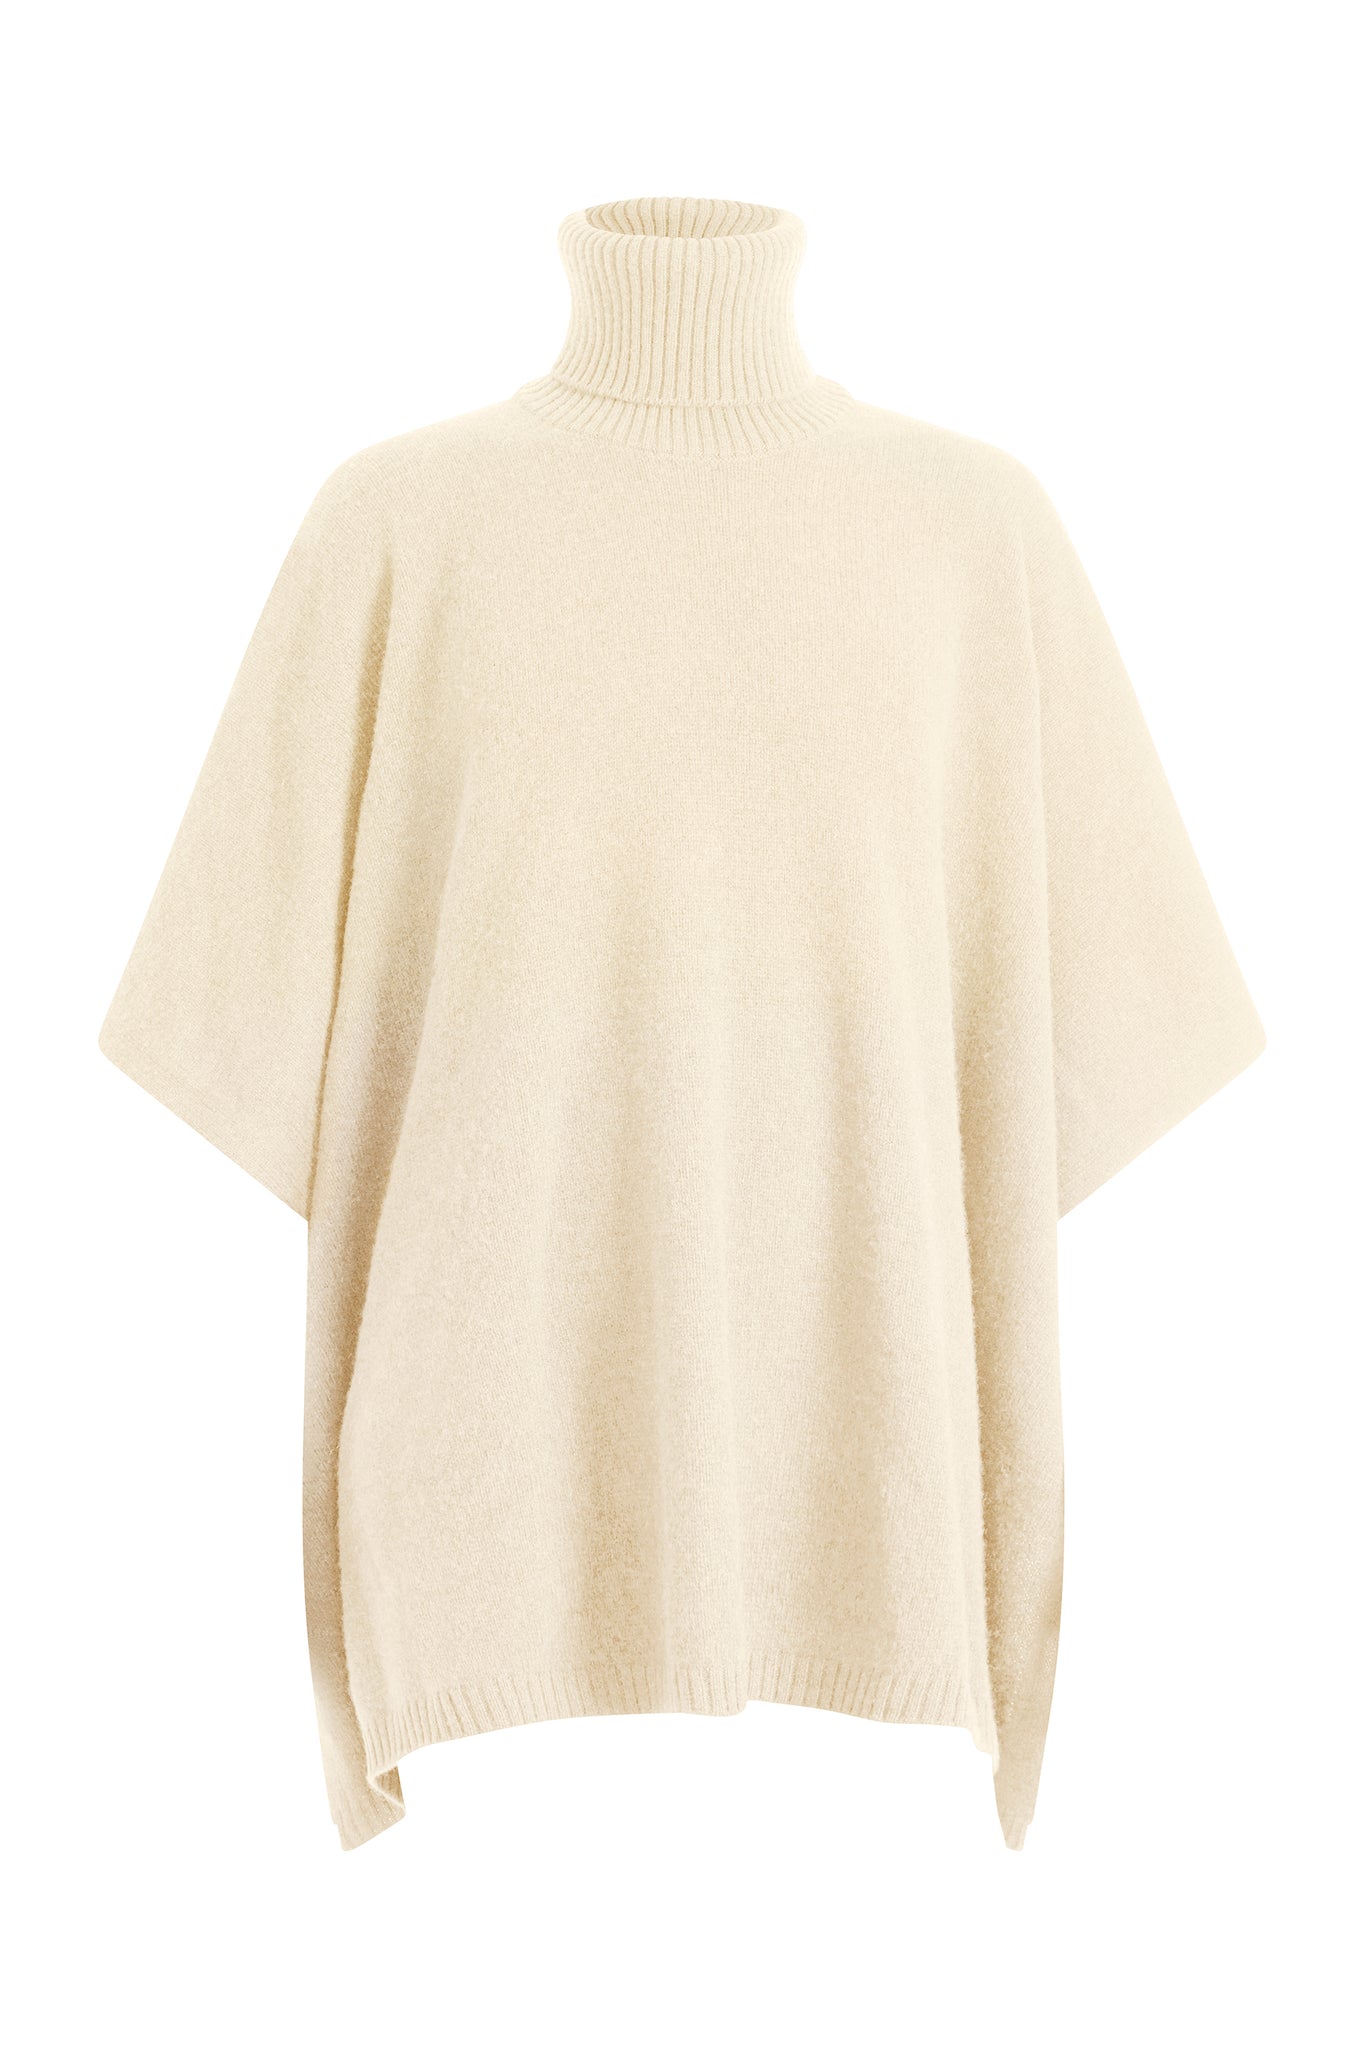 White cashmere poncho with turtle neck collar